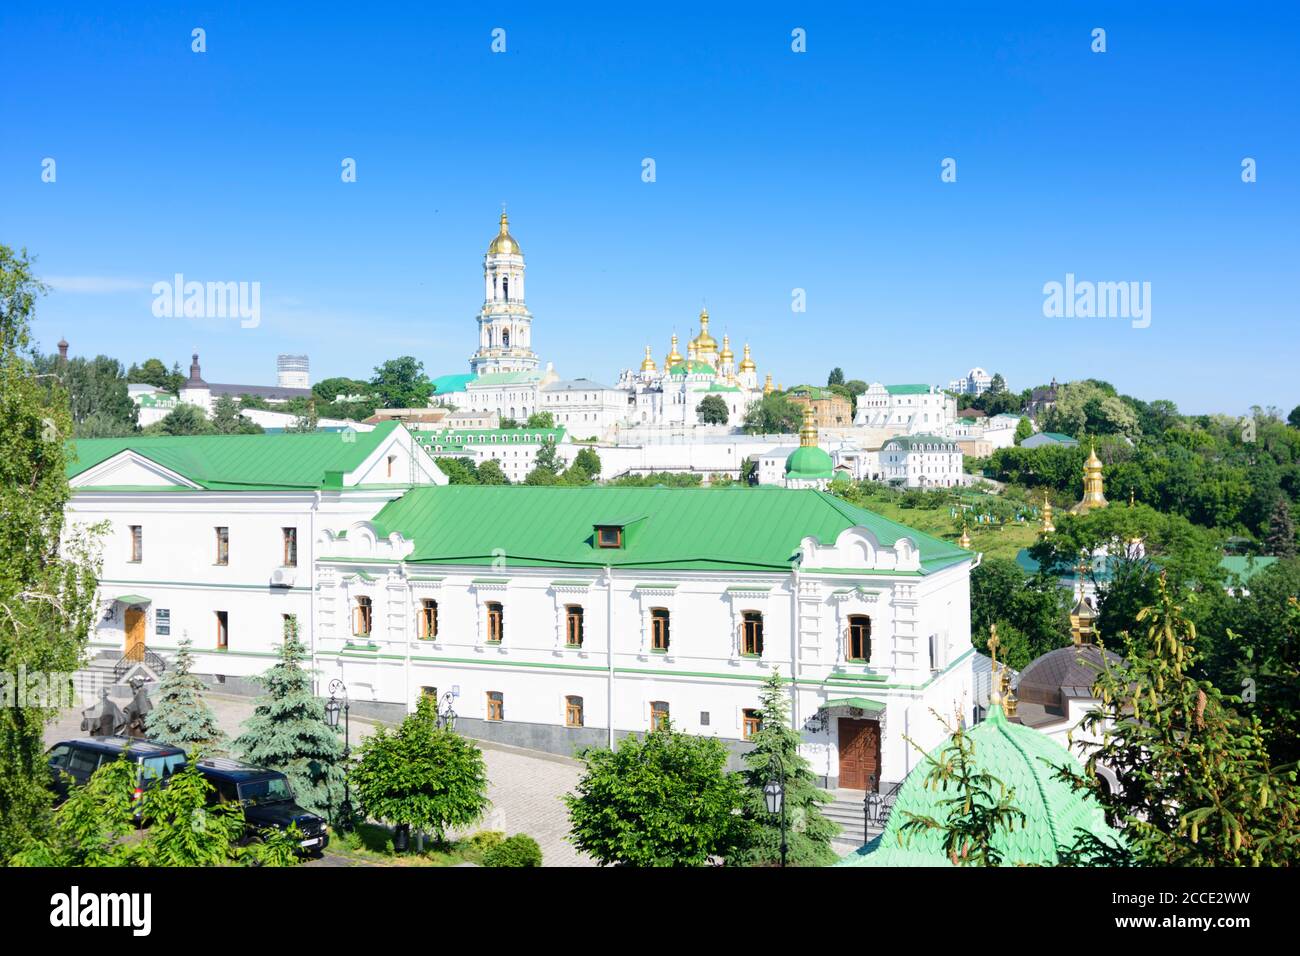 Kiev (Kyiv), Great Lavra Belltower, Dormition Cathedral (right), view from Lower Lavra, at Pechersk Lavra (Monastery of the Caves), historic Orthodox Stock Photo